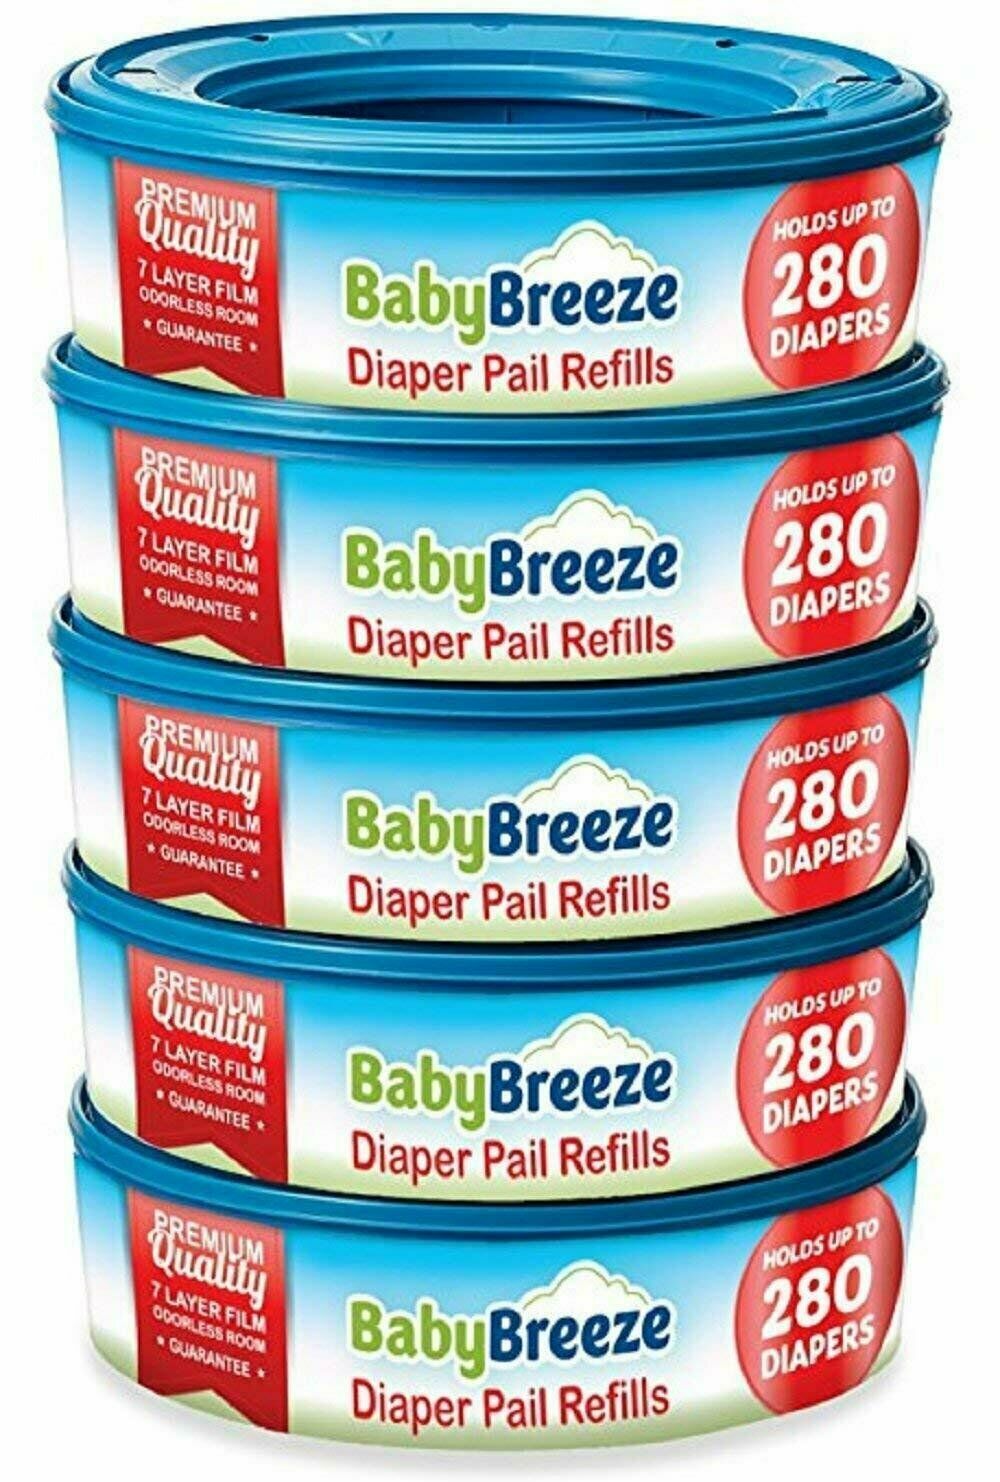 BabyBreeze Diaper Pail Refill Bags for Playtex Diaper Genie -1400 Count (5-Pack)